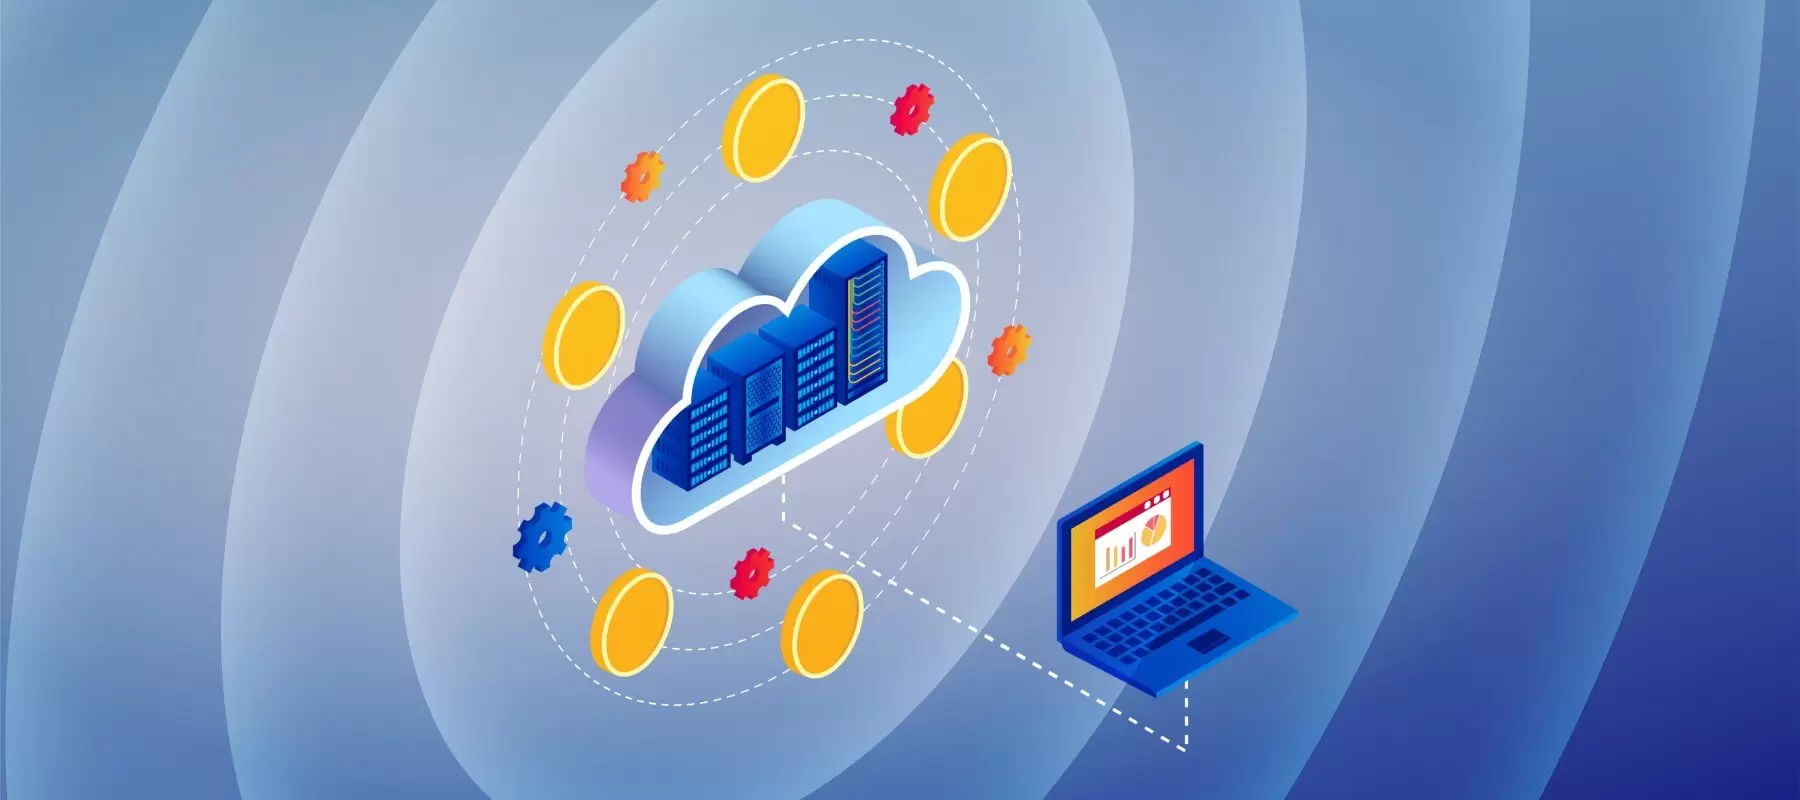 Illustration rising profits thanks to cloud services